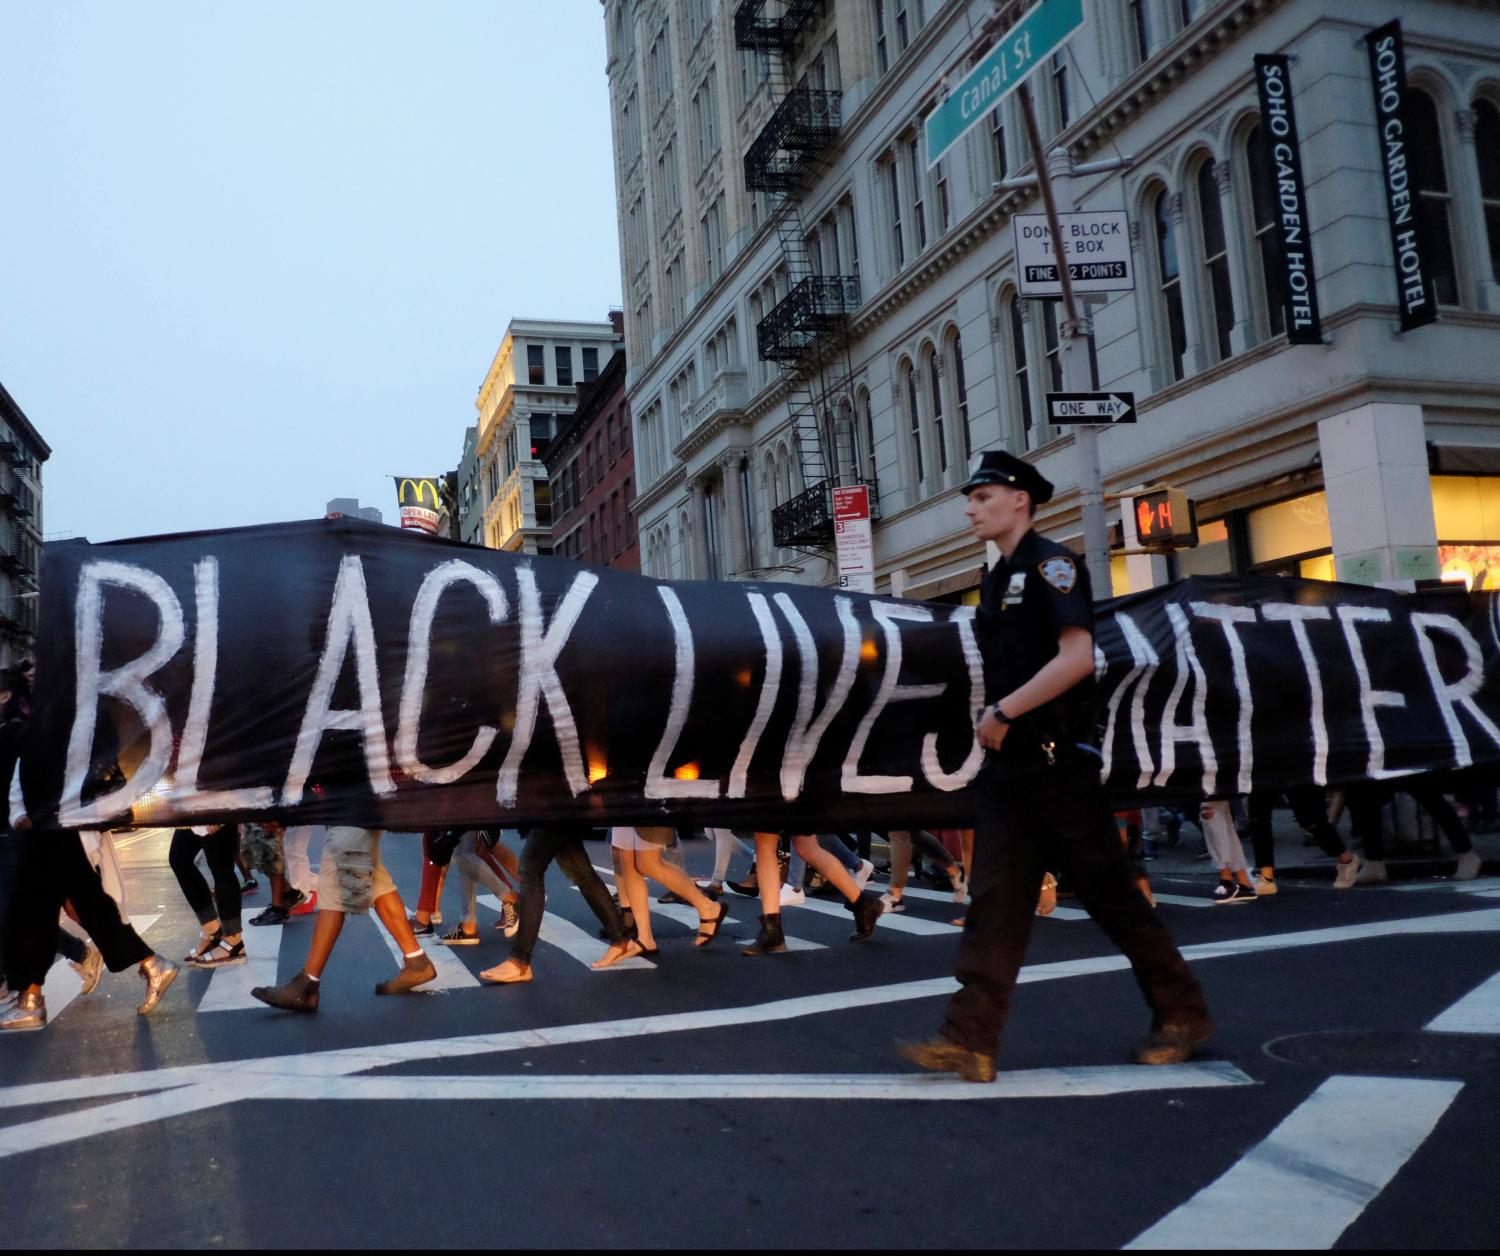 People take part in a protest against police brutality and in support of Black Lives Matter.